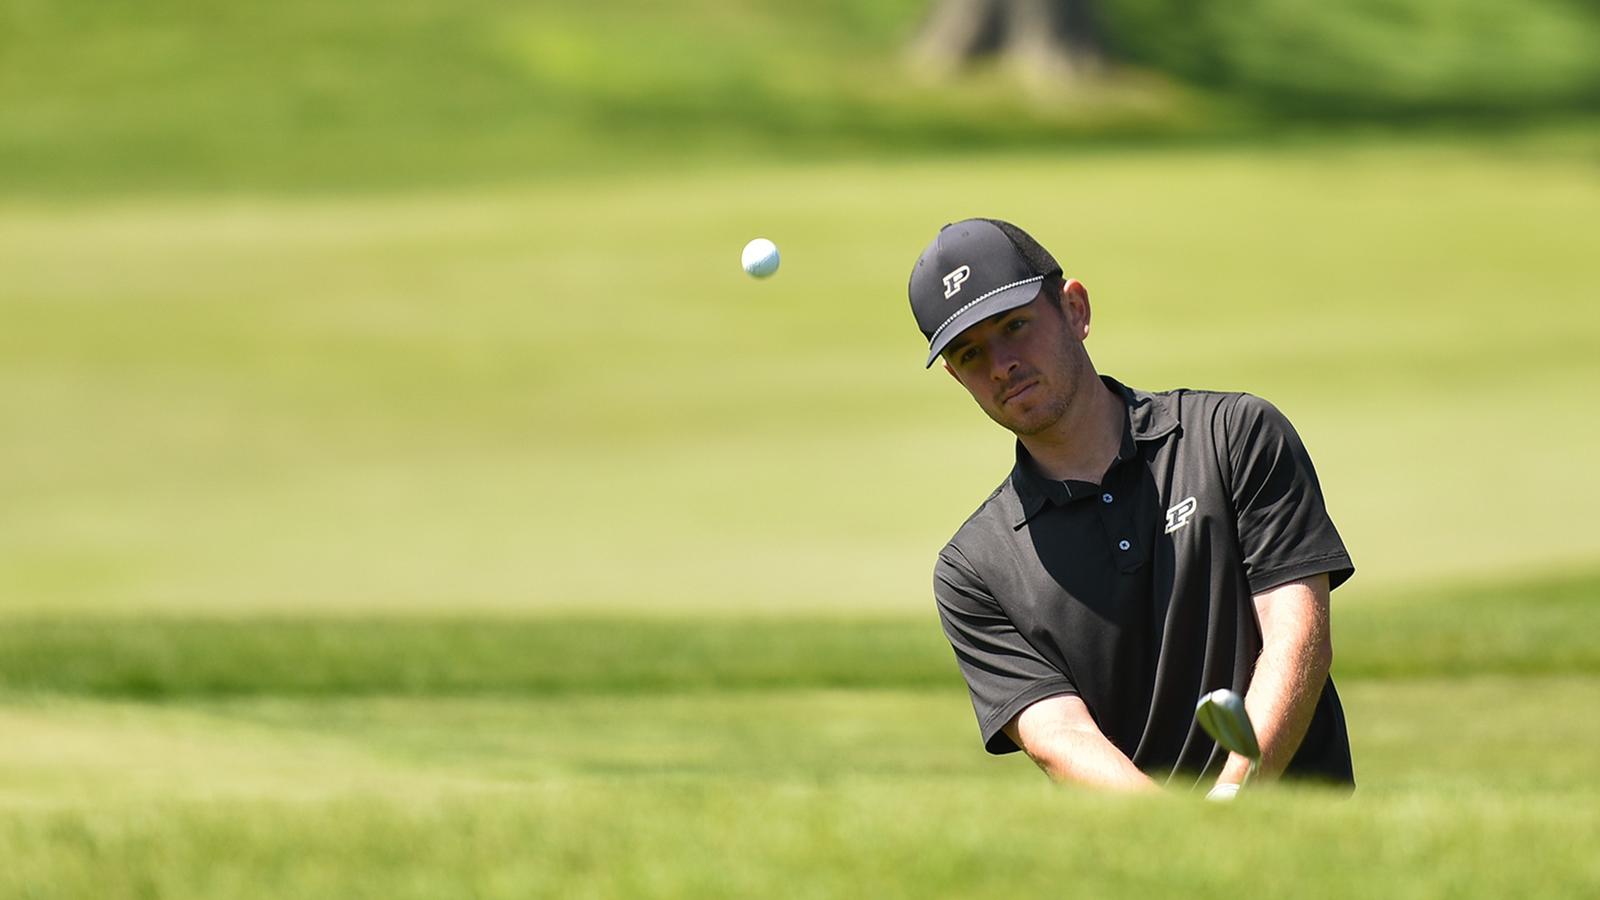 Dentino Advances out of Indianapolis to Advance to U.S. Open Sectional Qualifying